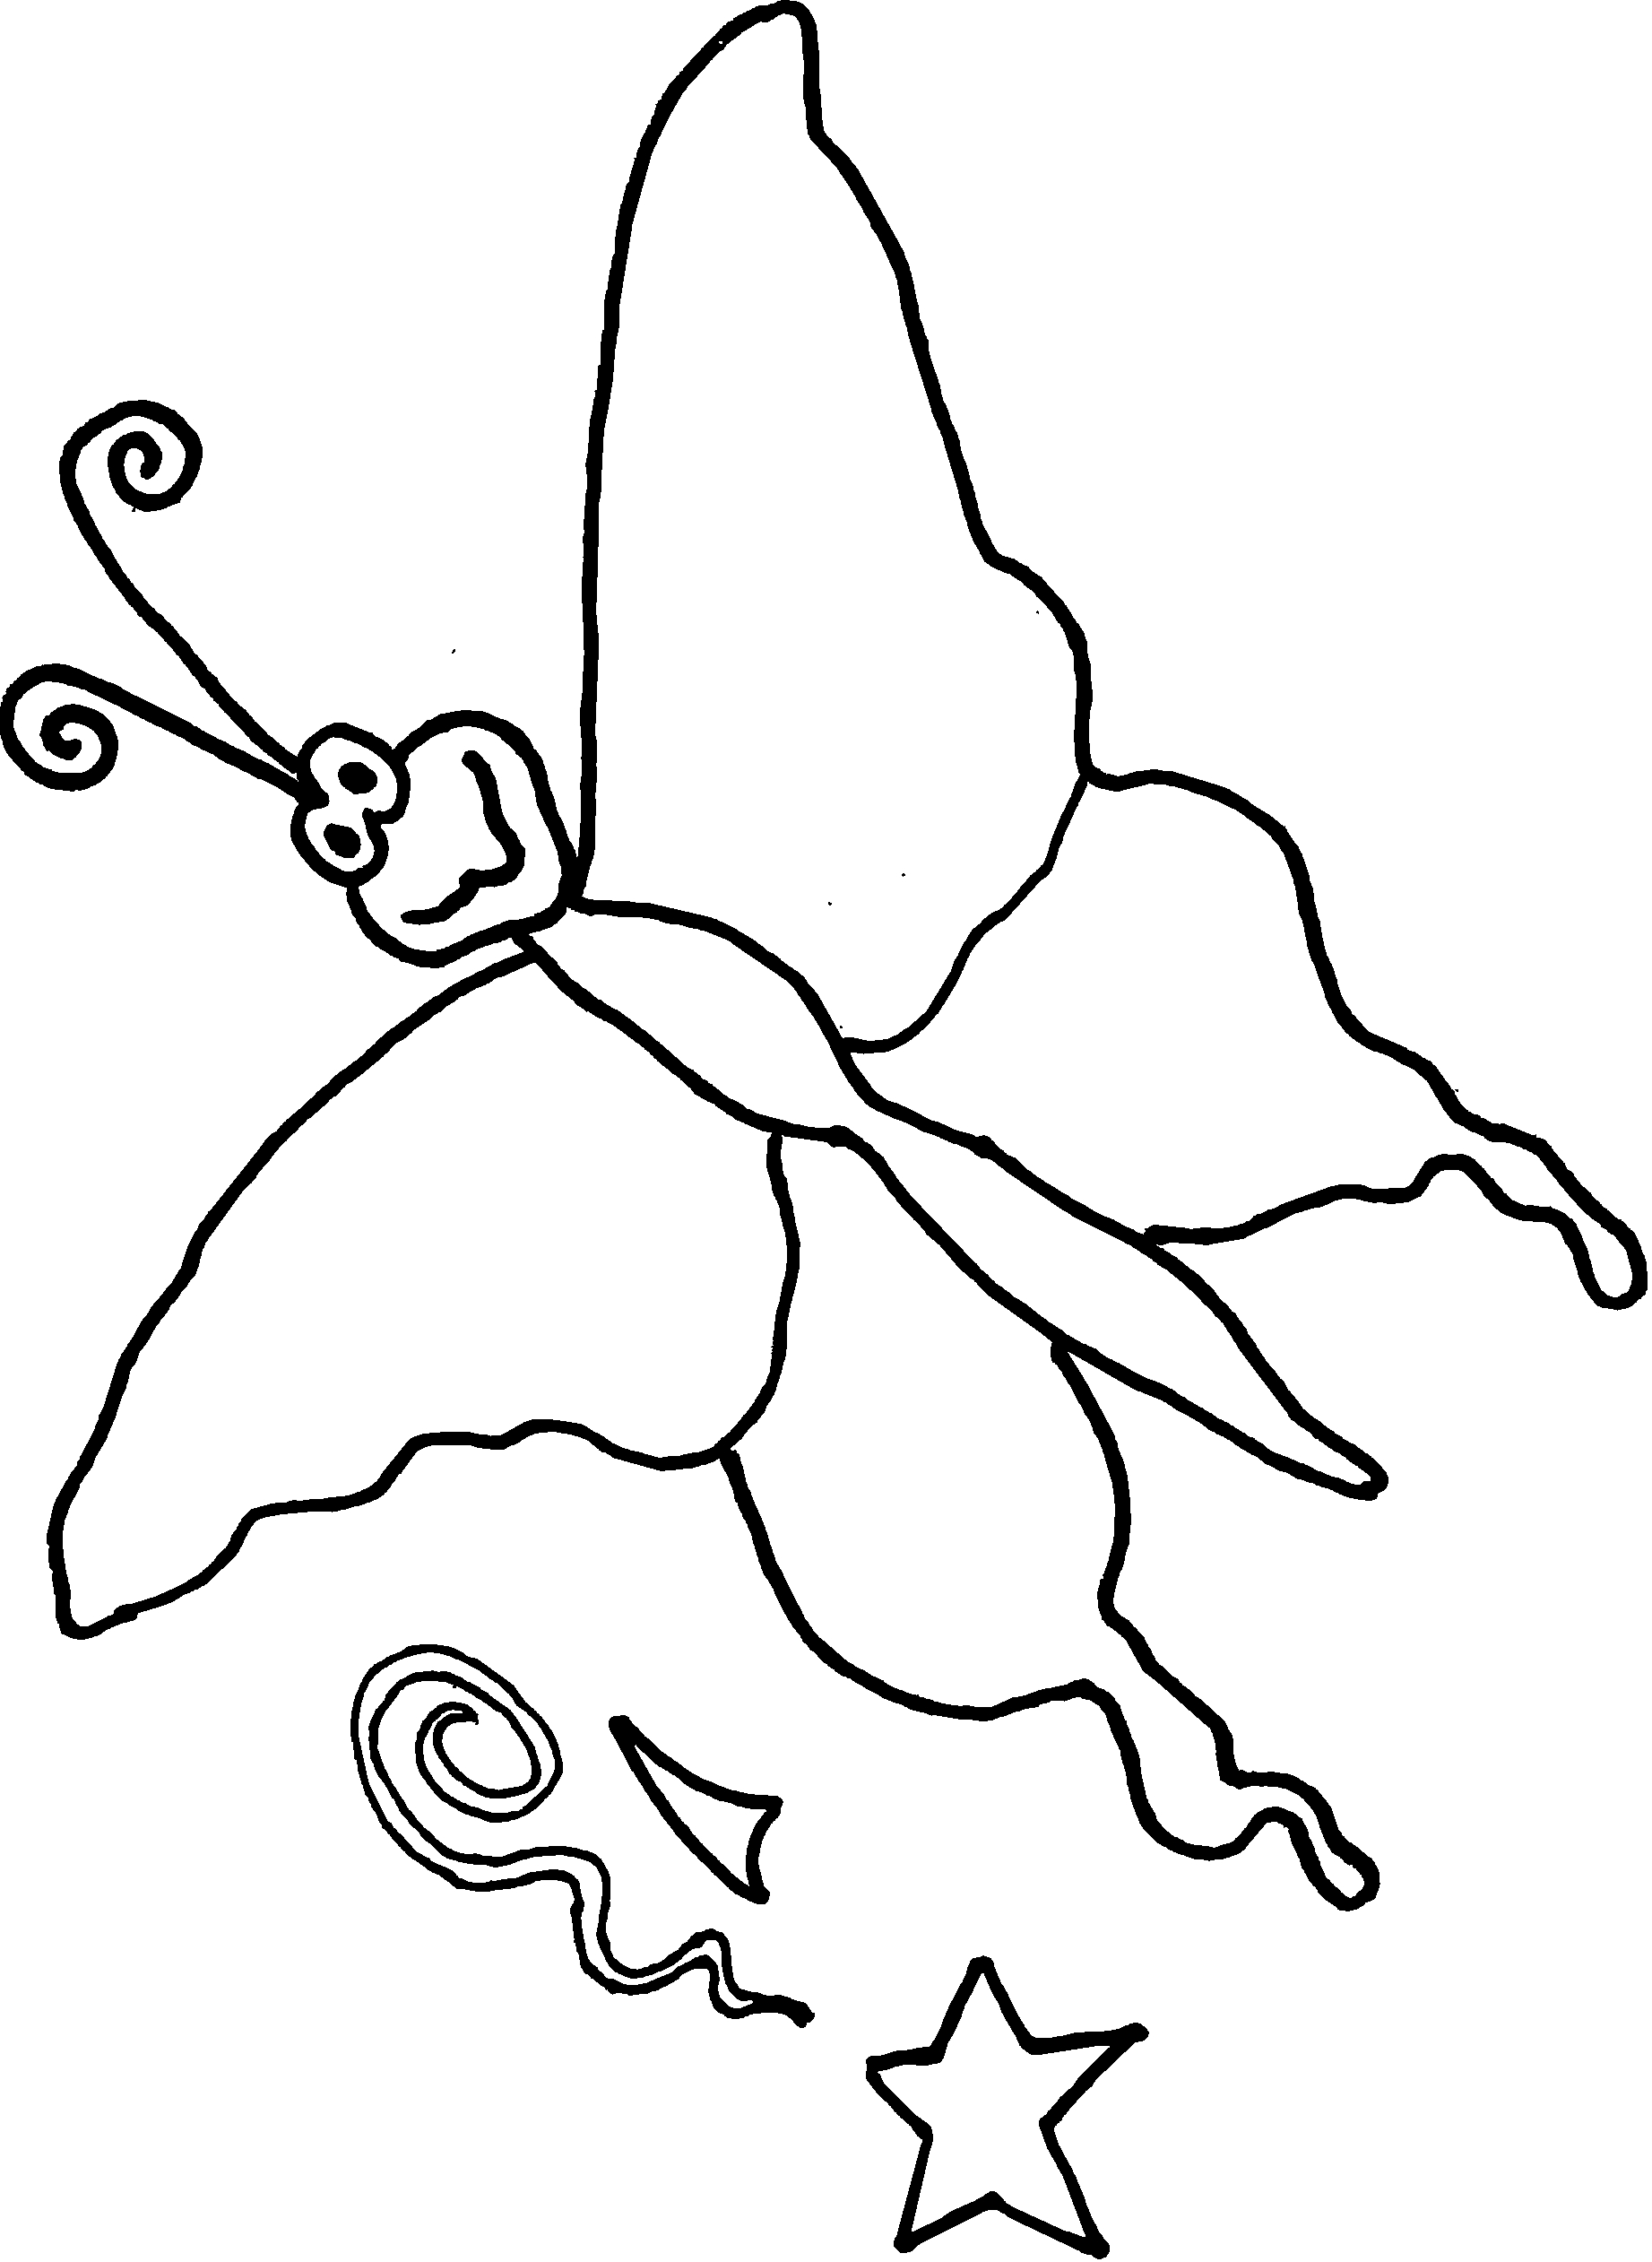 clipart line drawings free - photo #37